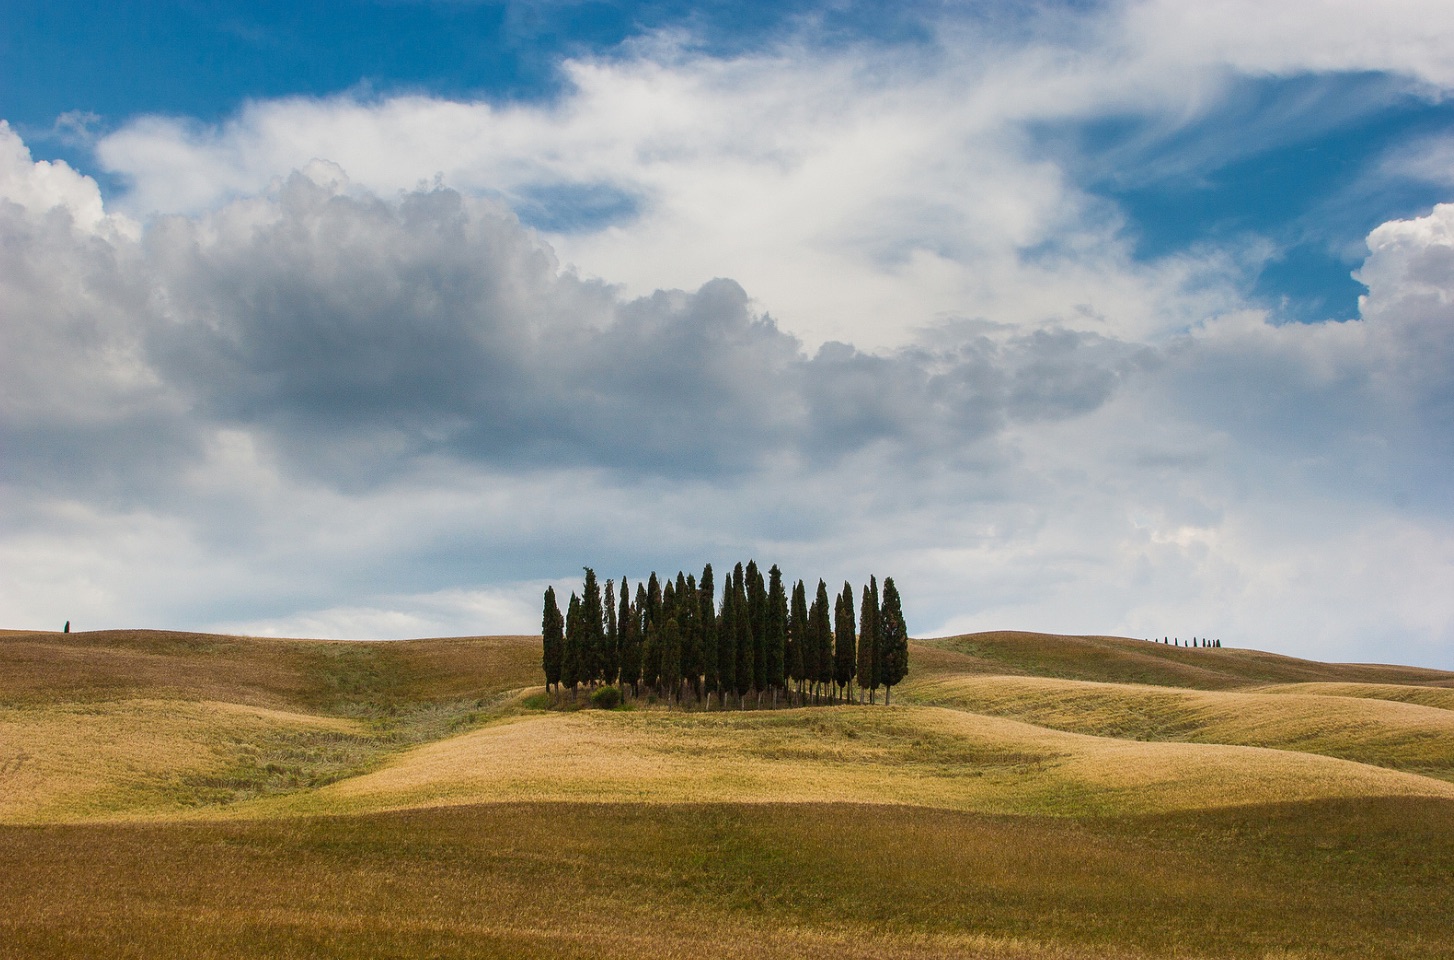 Lonely_Cypress___Located_near_San_Quirico_d_Orcia_in_Tuscany…___Mahmoud_Abuabdou___Flickr.jpg